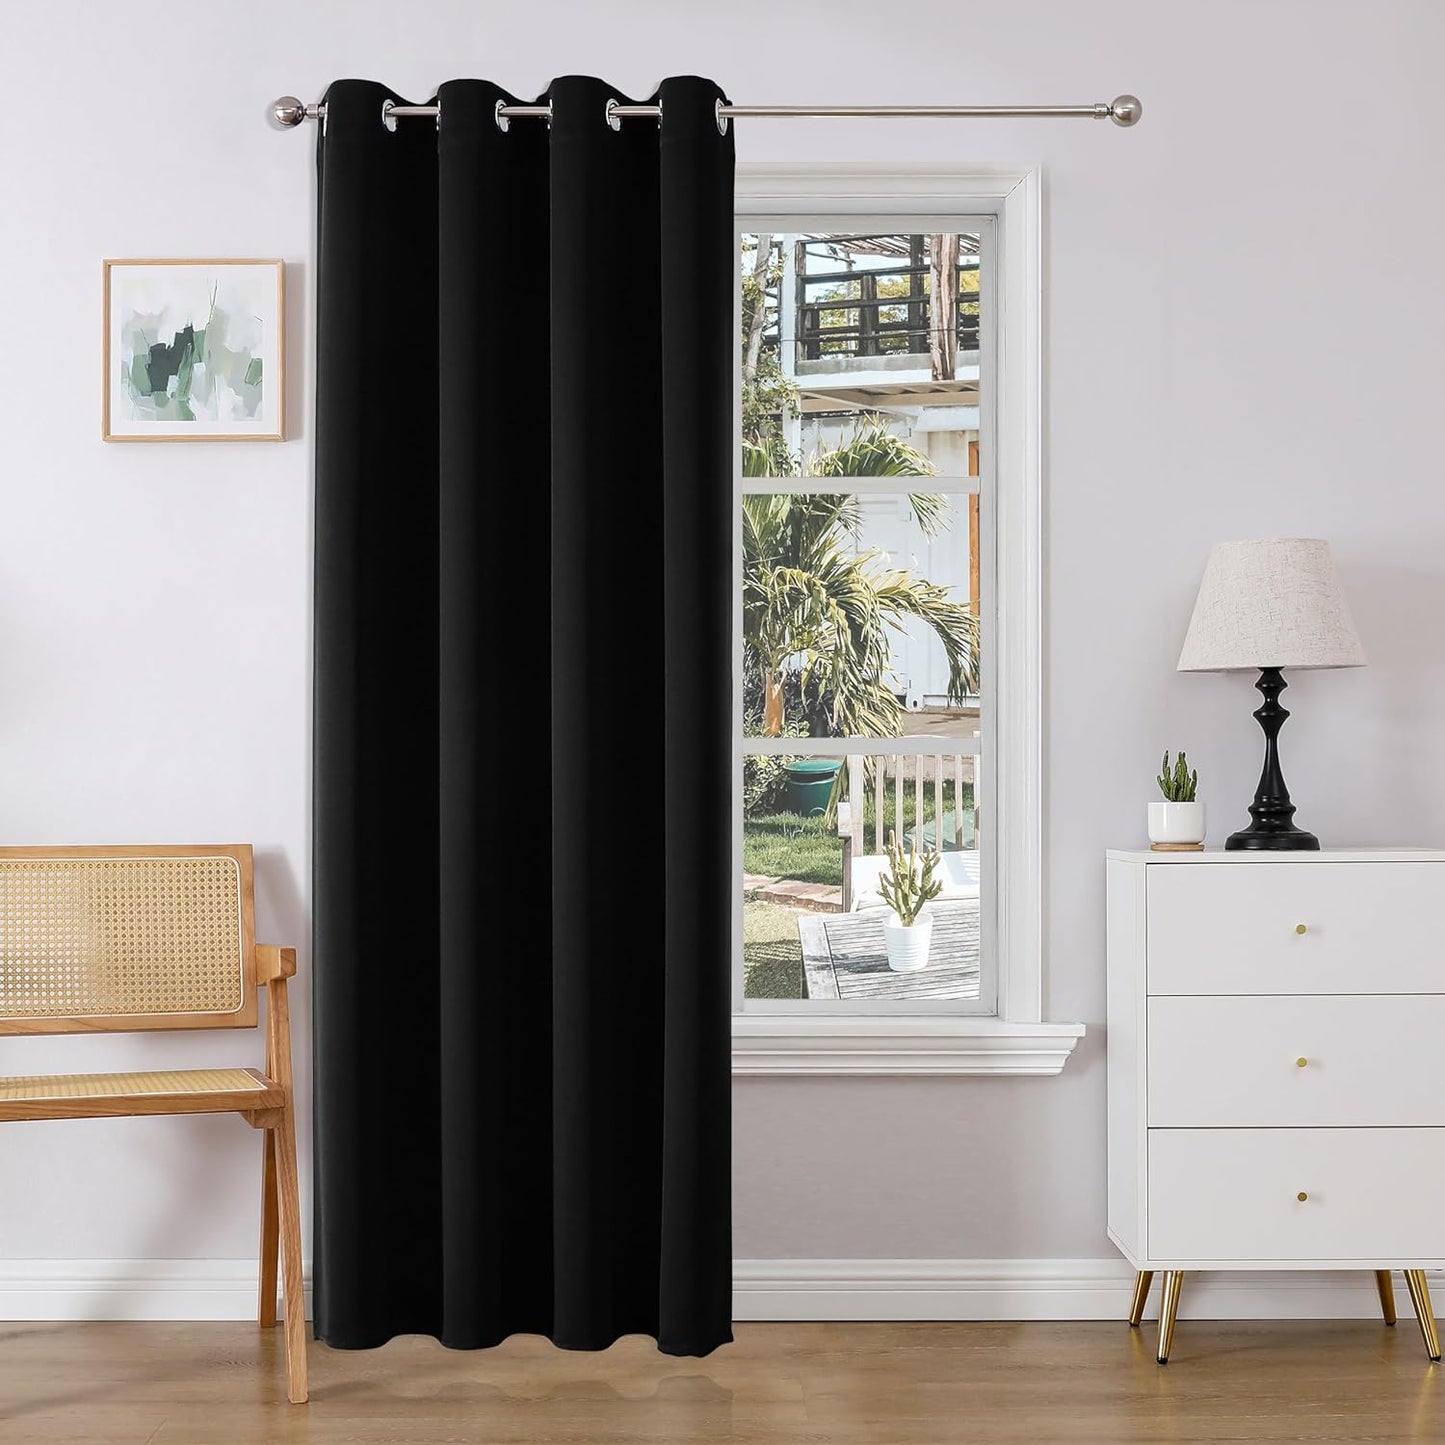 Joydeco Curtains for Sliding Glass Doors, Blackout Curtains 100 X 84 Inches, Extra Wide Curtains for Patio Sliding Door Living Room, Room Divider Curtains  Joydeco Black 52W X 84L Inch X 1 Panel 